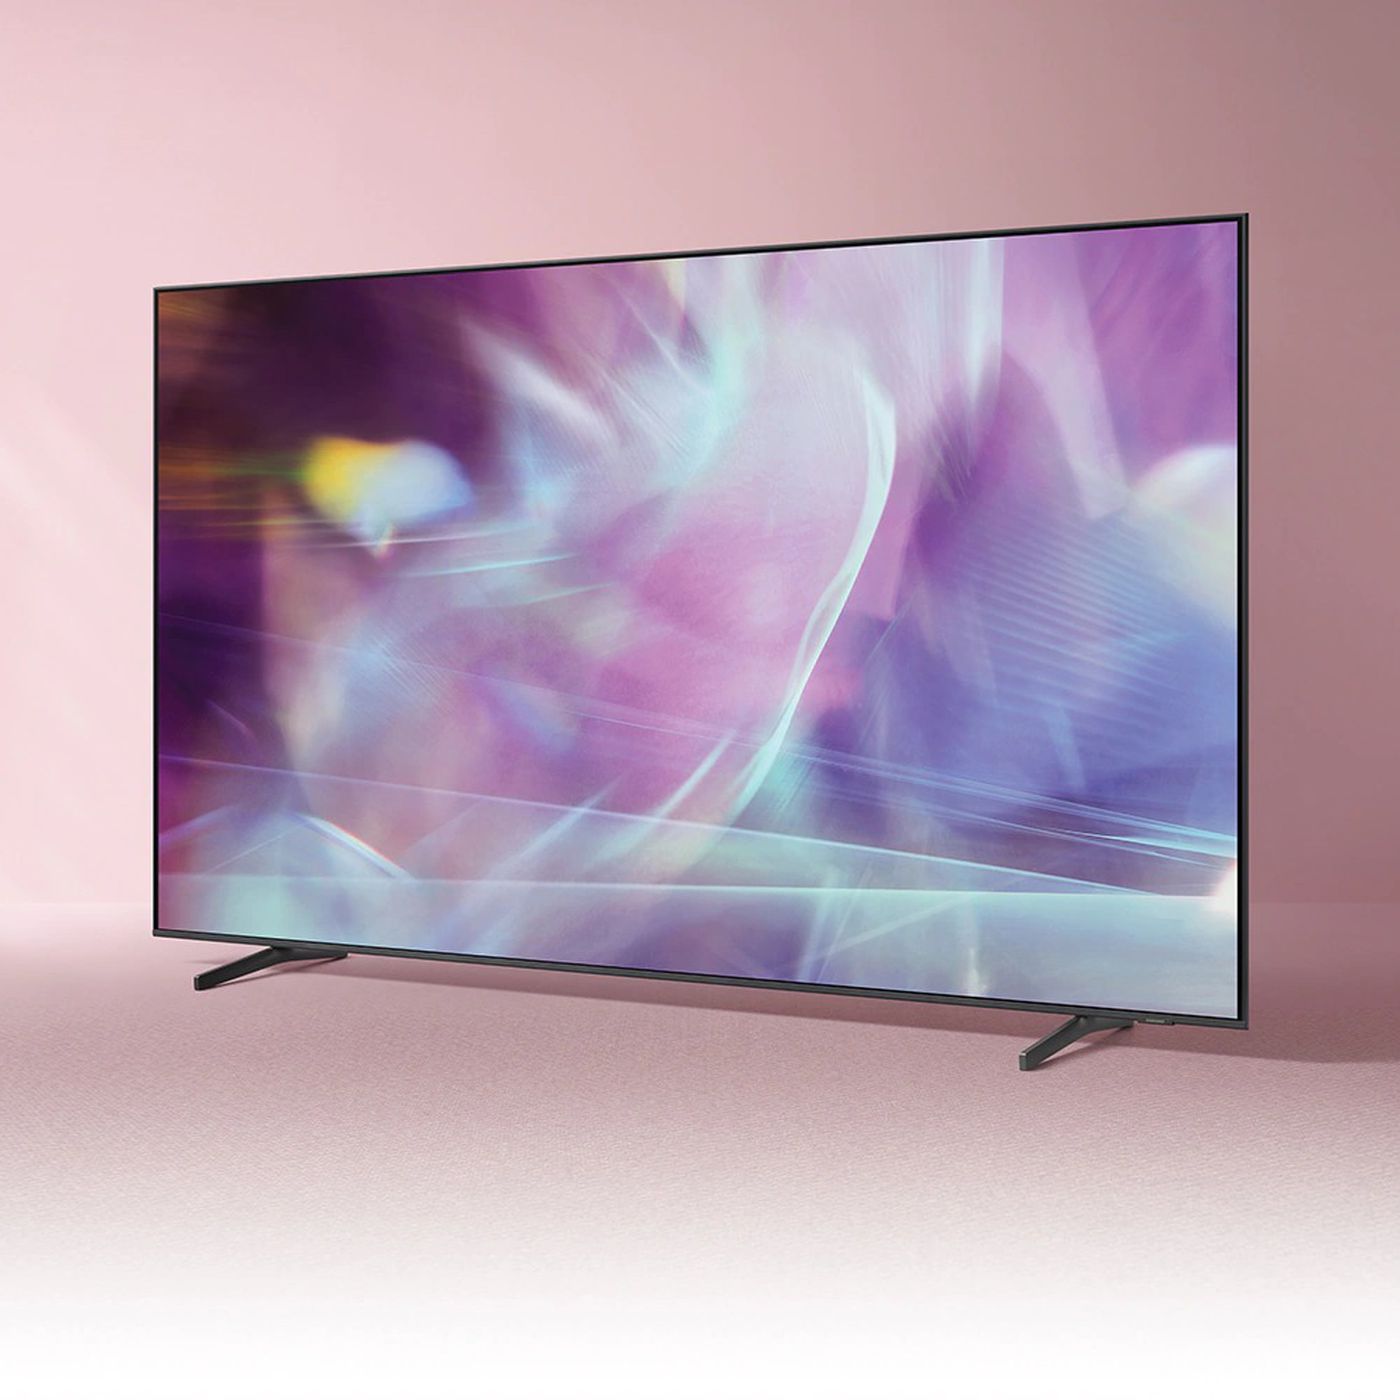 Samsung Says It Can Remotely Disable Stolen Tvs The Verge